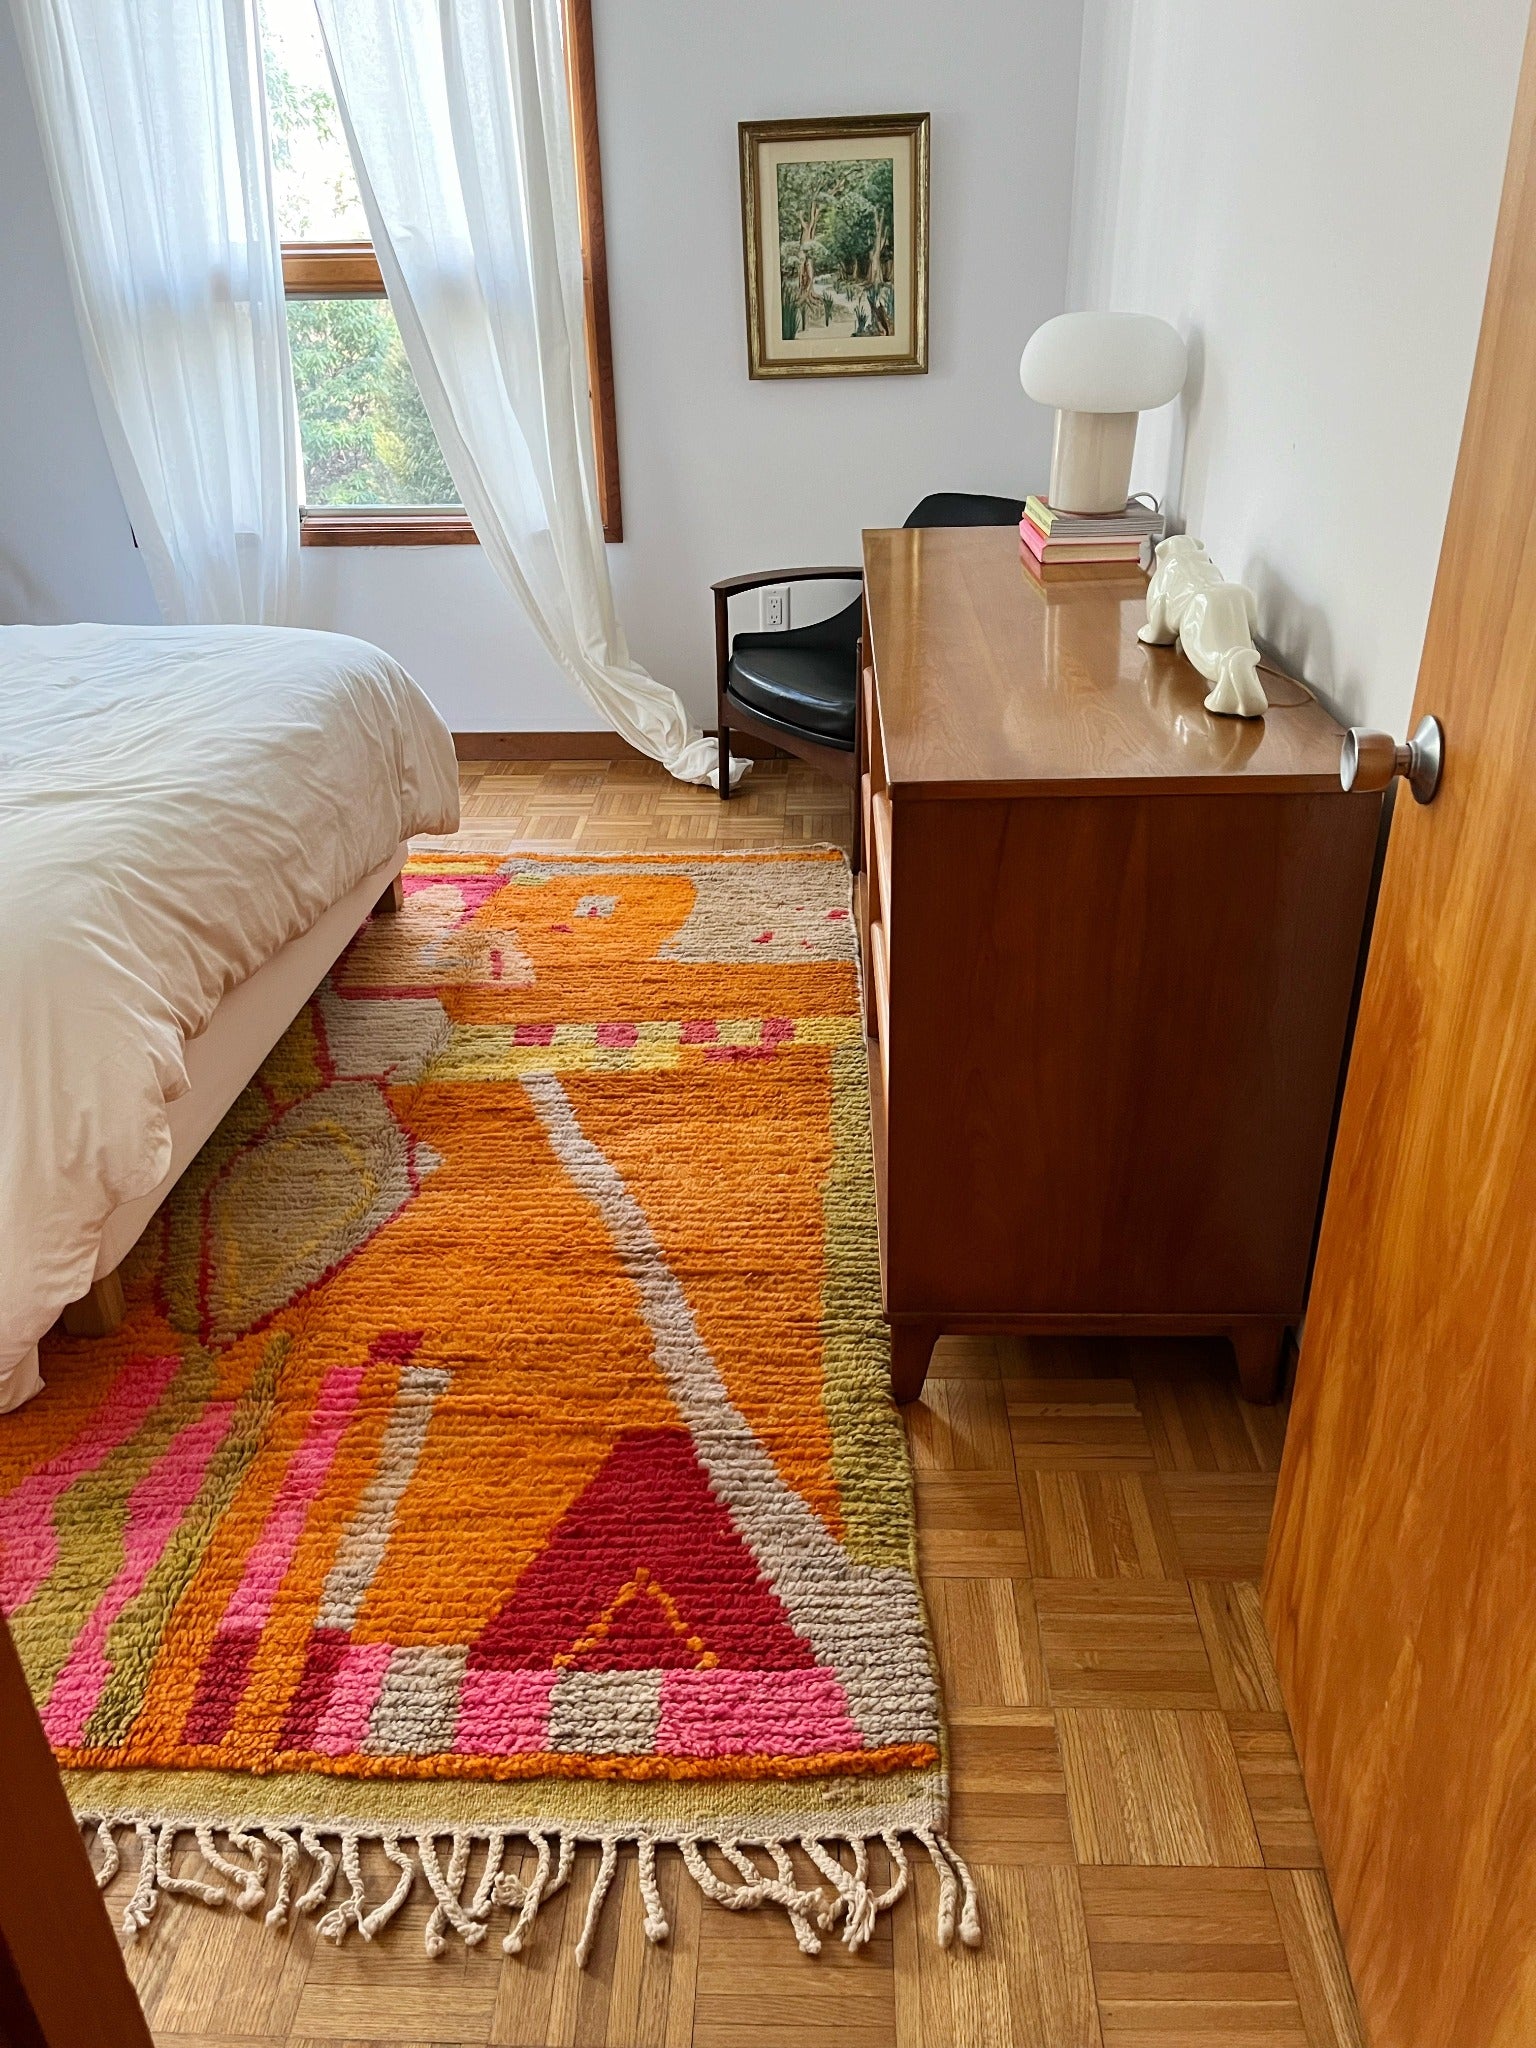 Bright colored rugs Moroccan style in bedroom